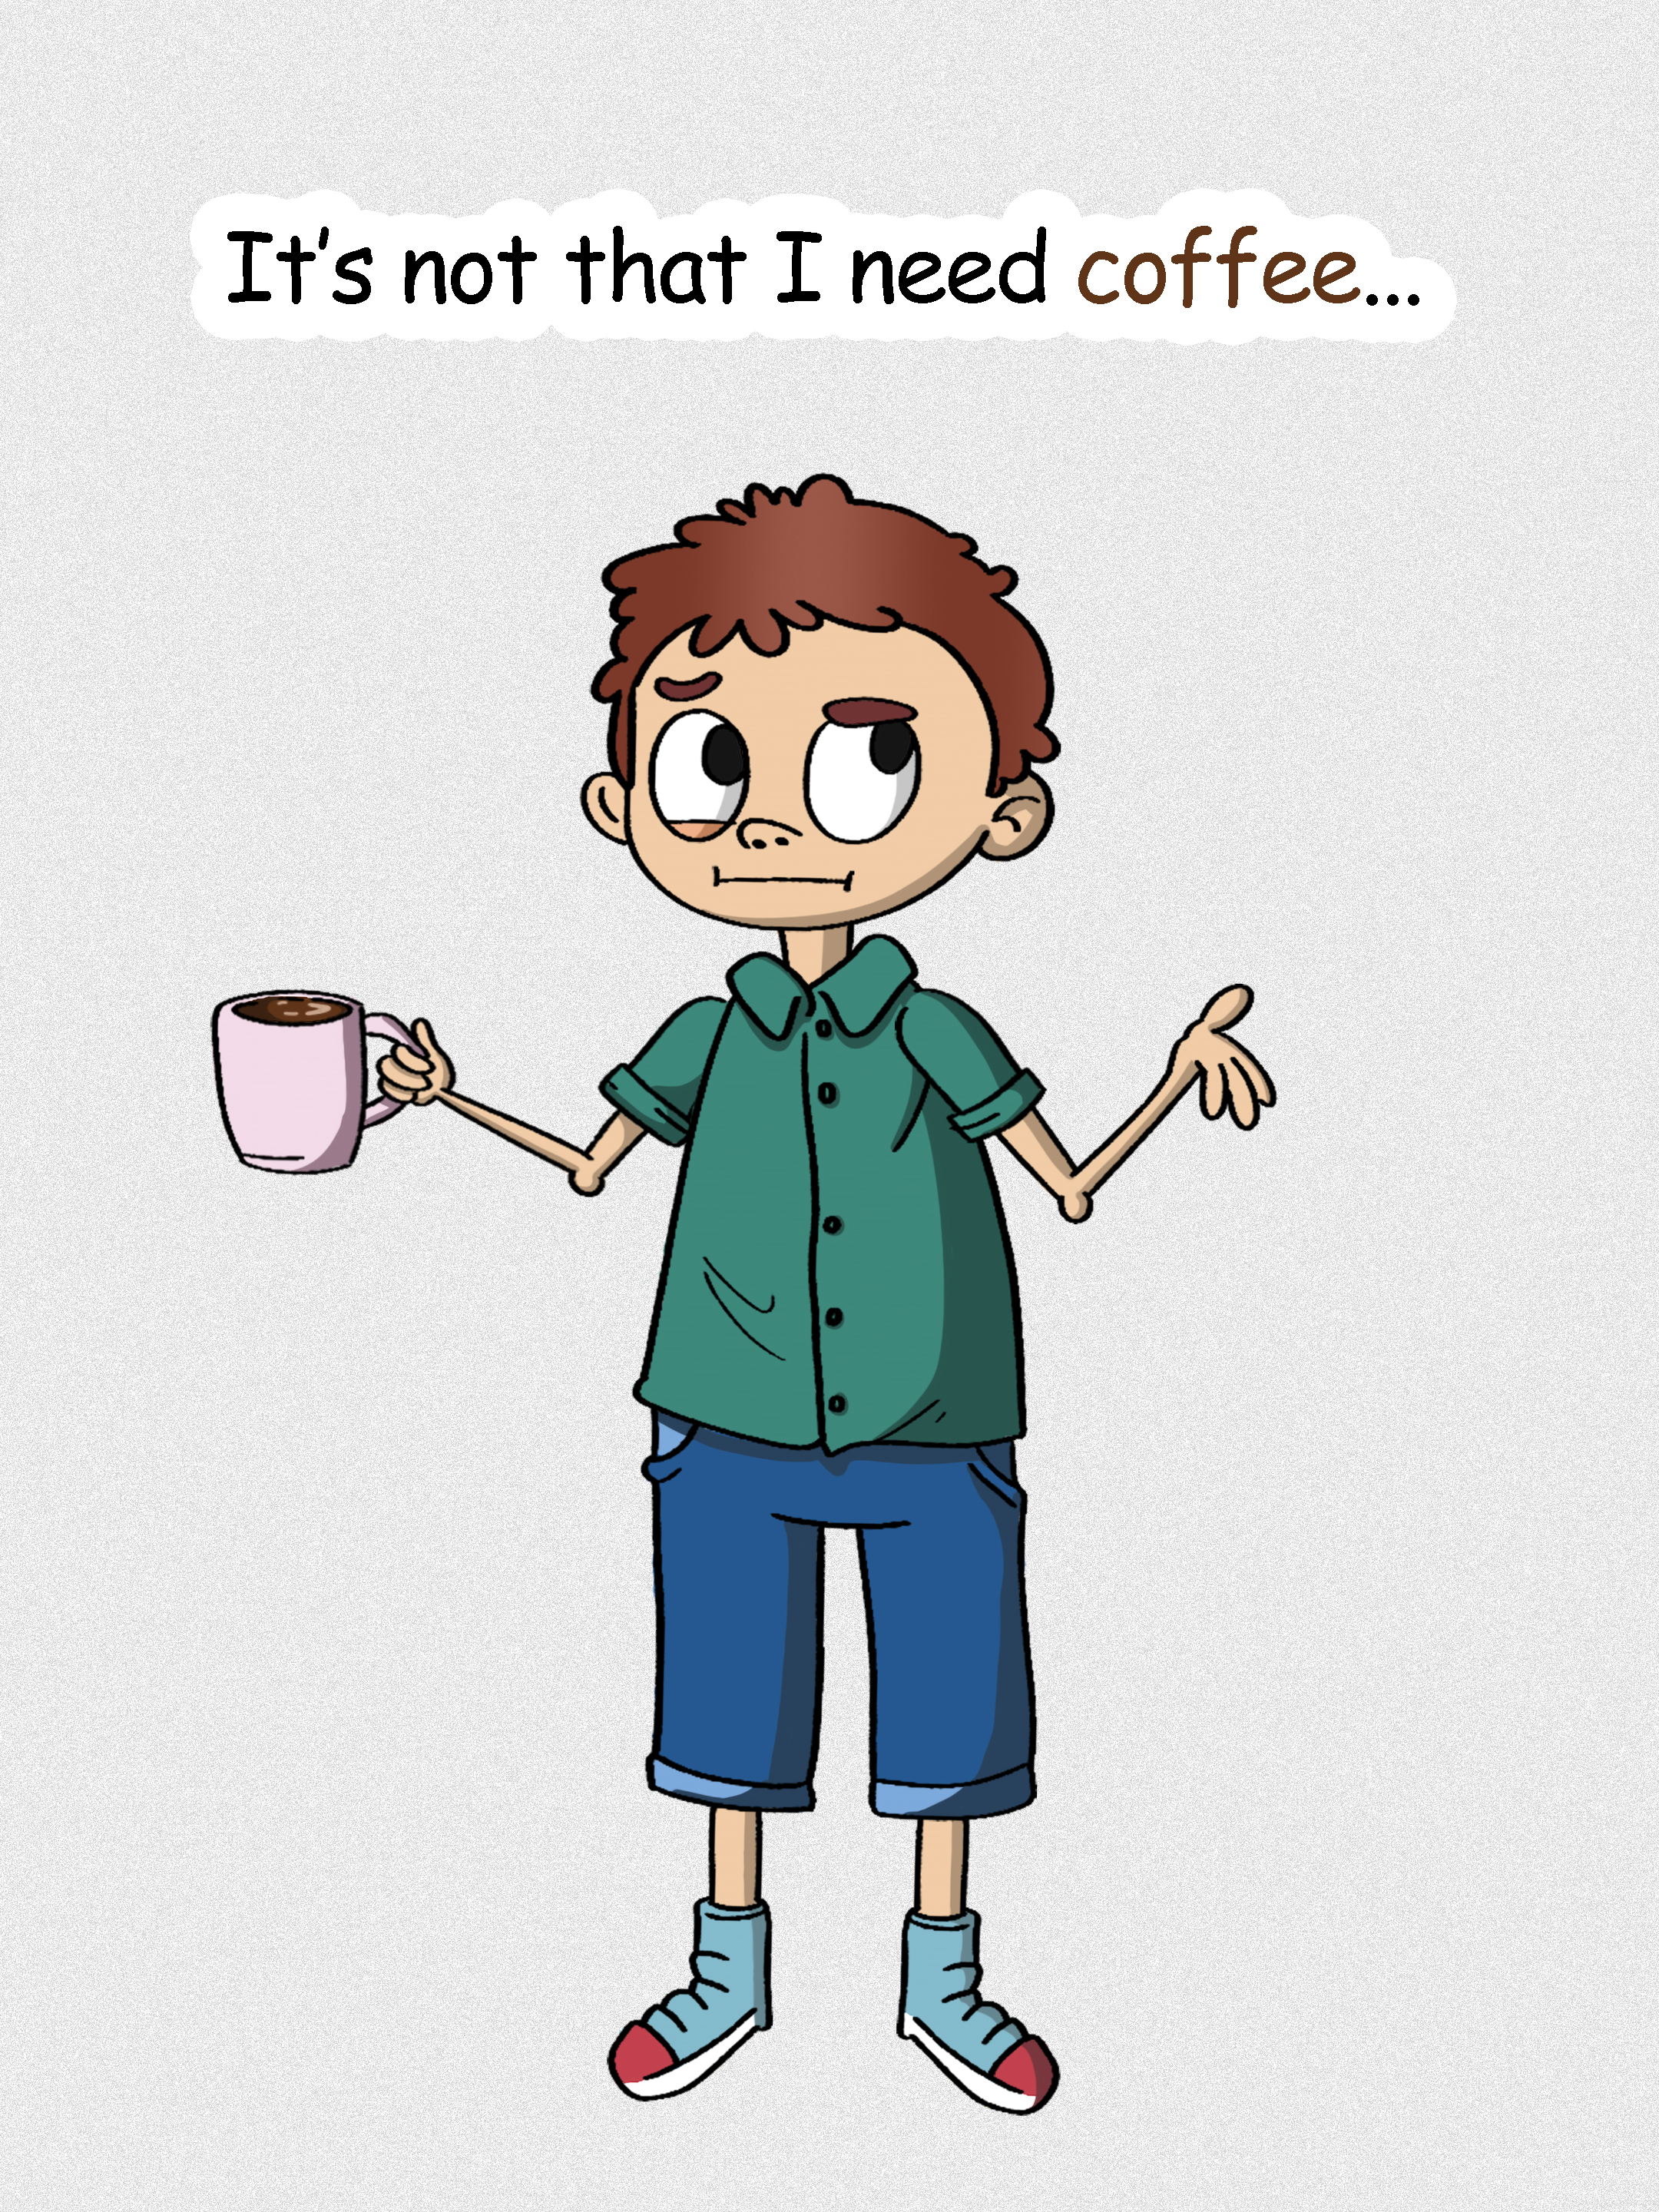 It's not that I need coffee! ☕😍🙄 #coffeelover #animationmeme #coffee #funnyshorts #comedy #relatable